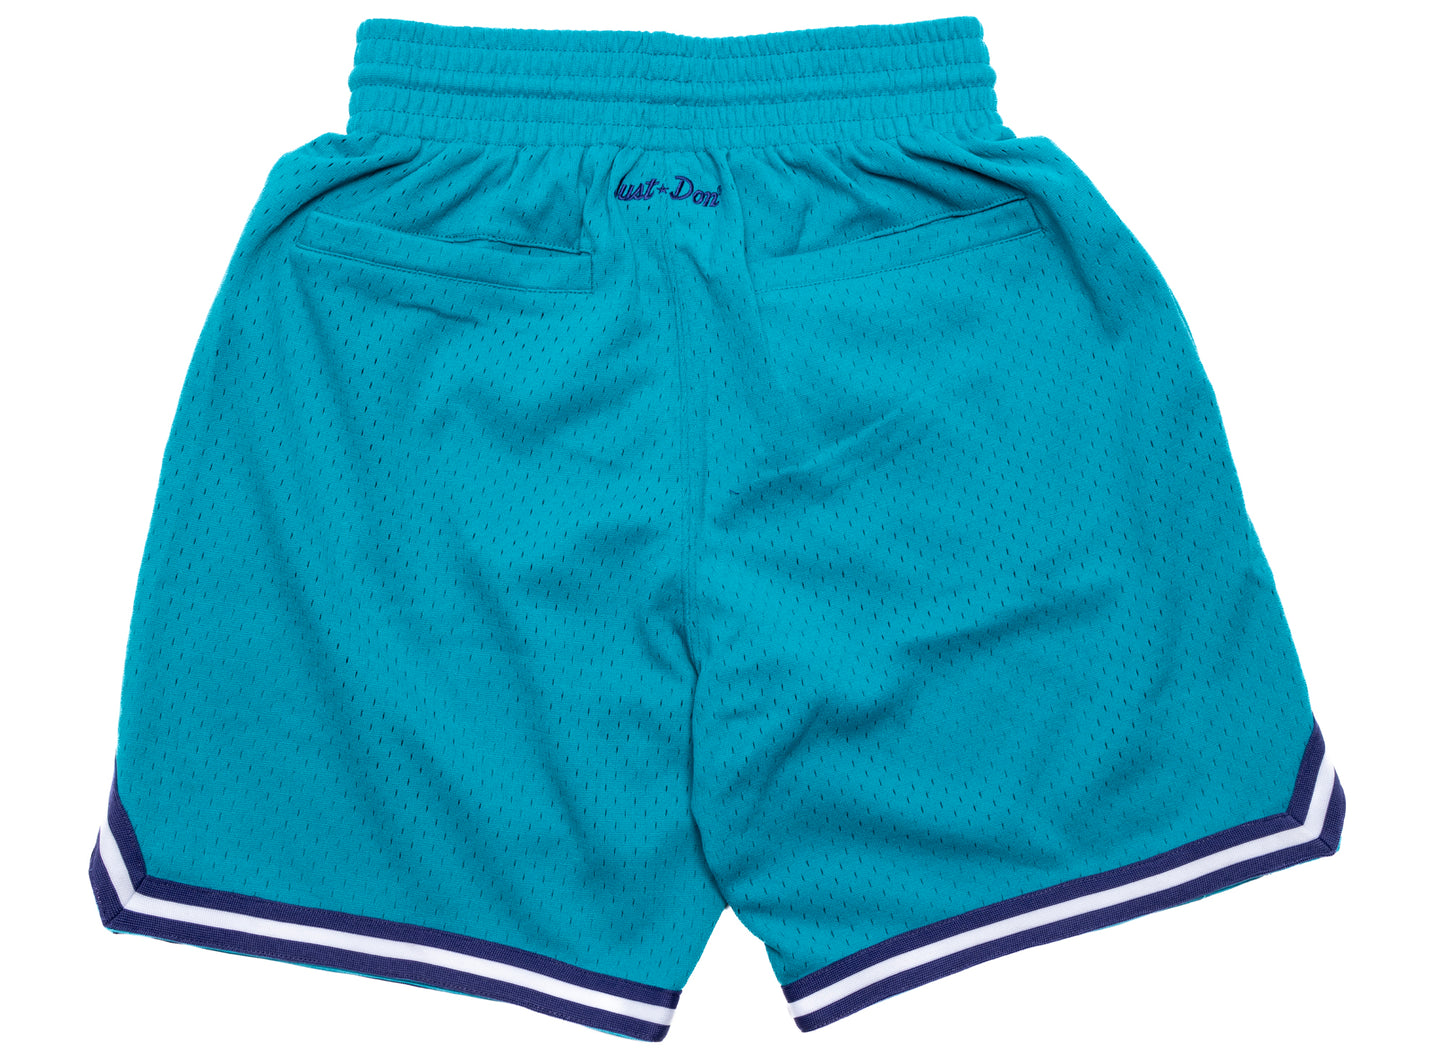 Mitchell & Ness MLB Just Don Hornets Practice Shorts xld